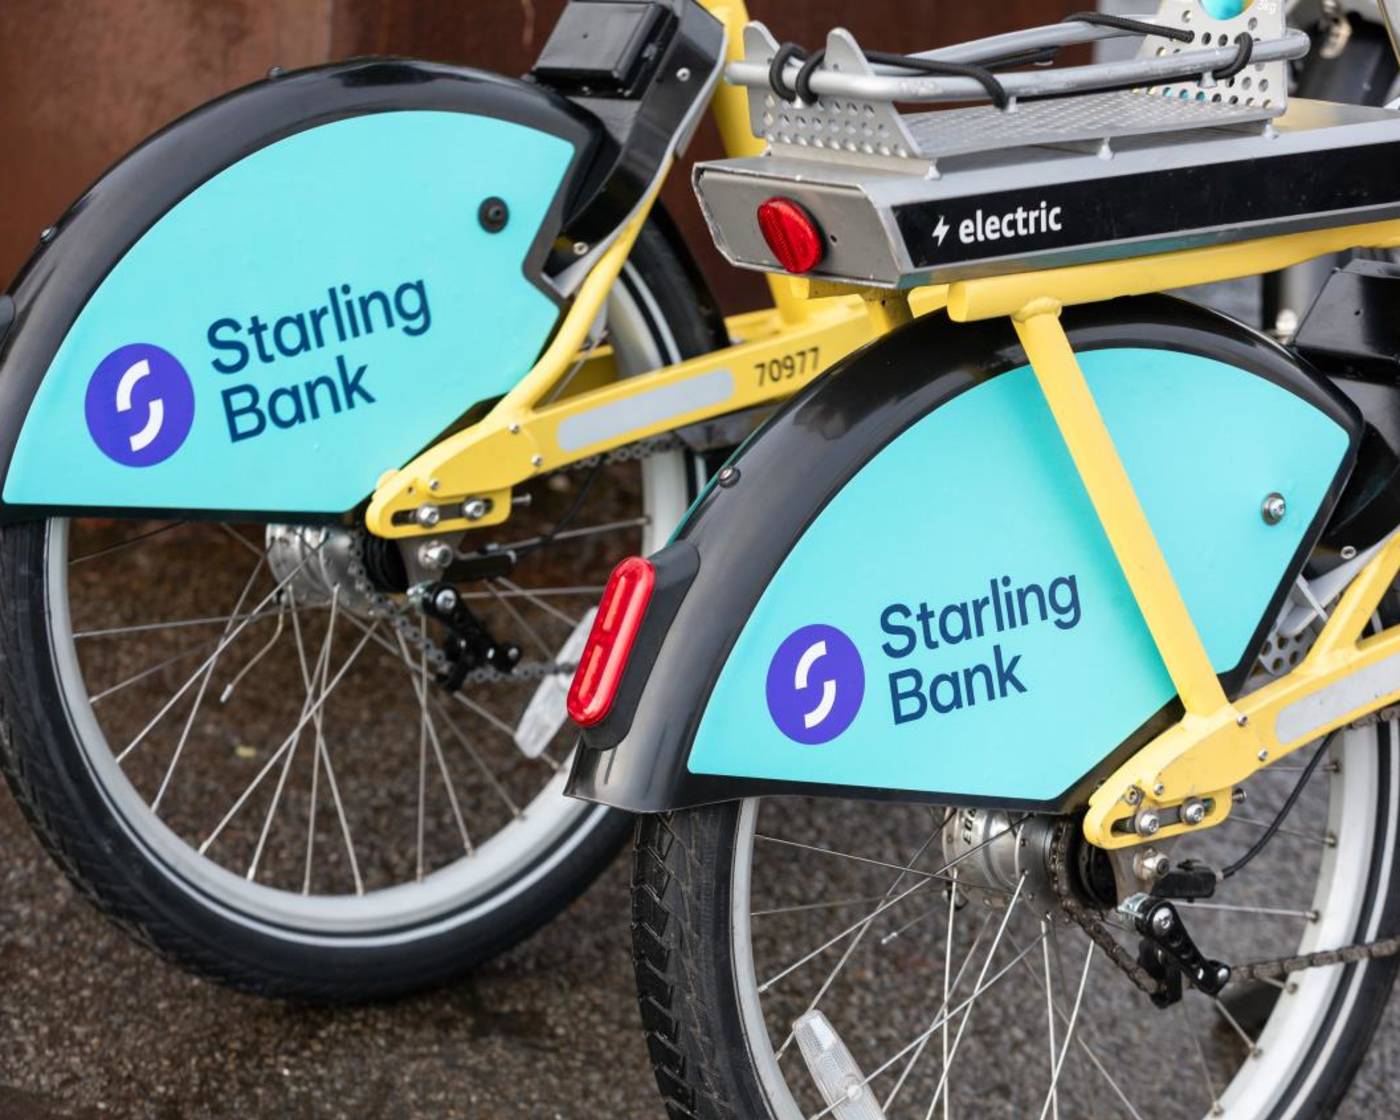 Two new starling bank bikes in Manchester